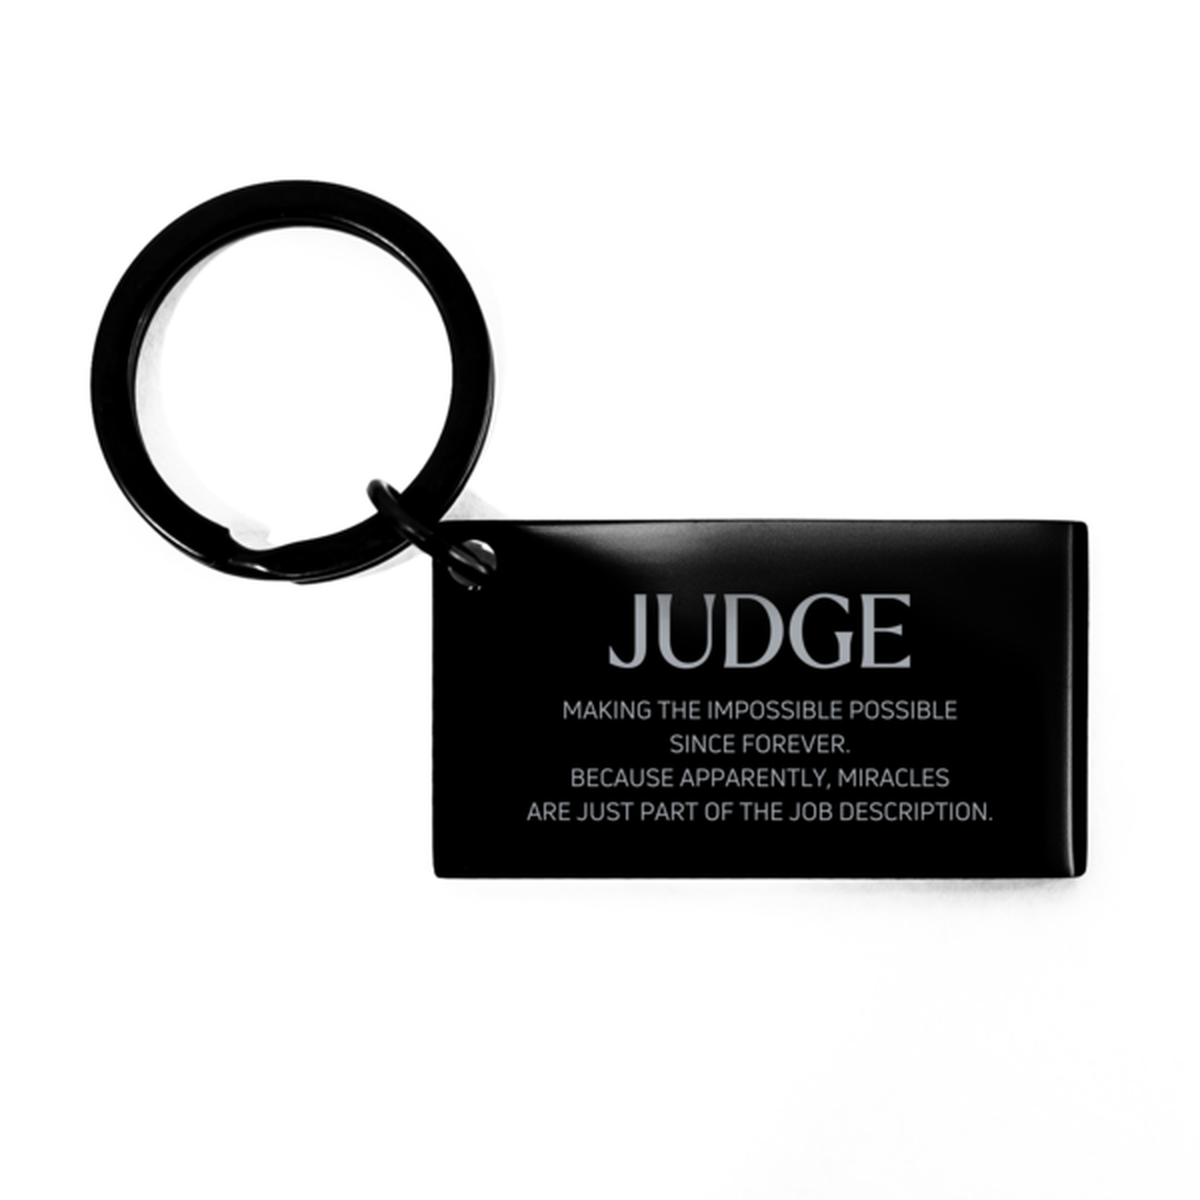 Funny Judge Gifts, Miracles are just part of the job description, Inspirational Birthday Keychain For Judge, Men, Women, Coworkers, Friends, Boss